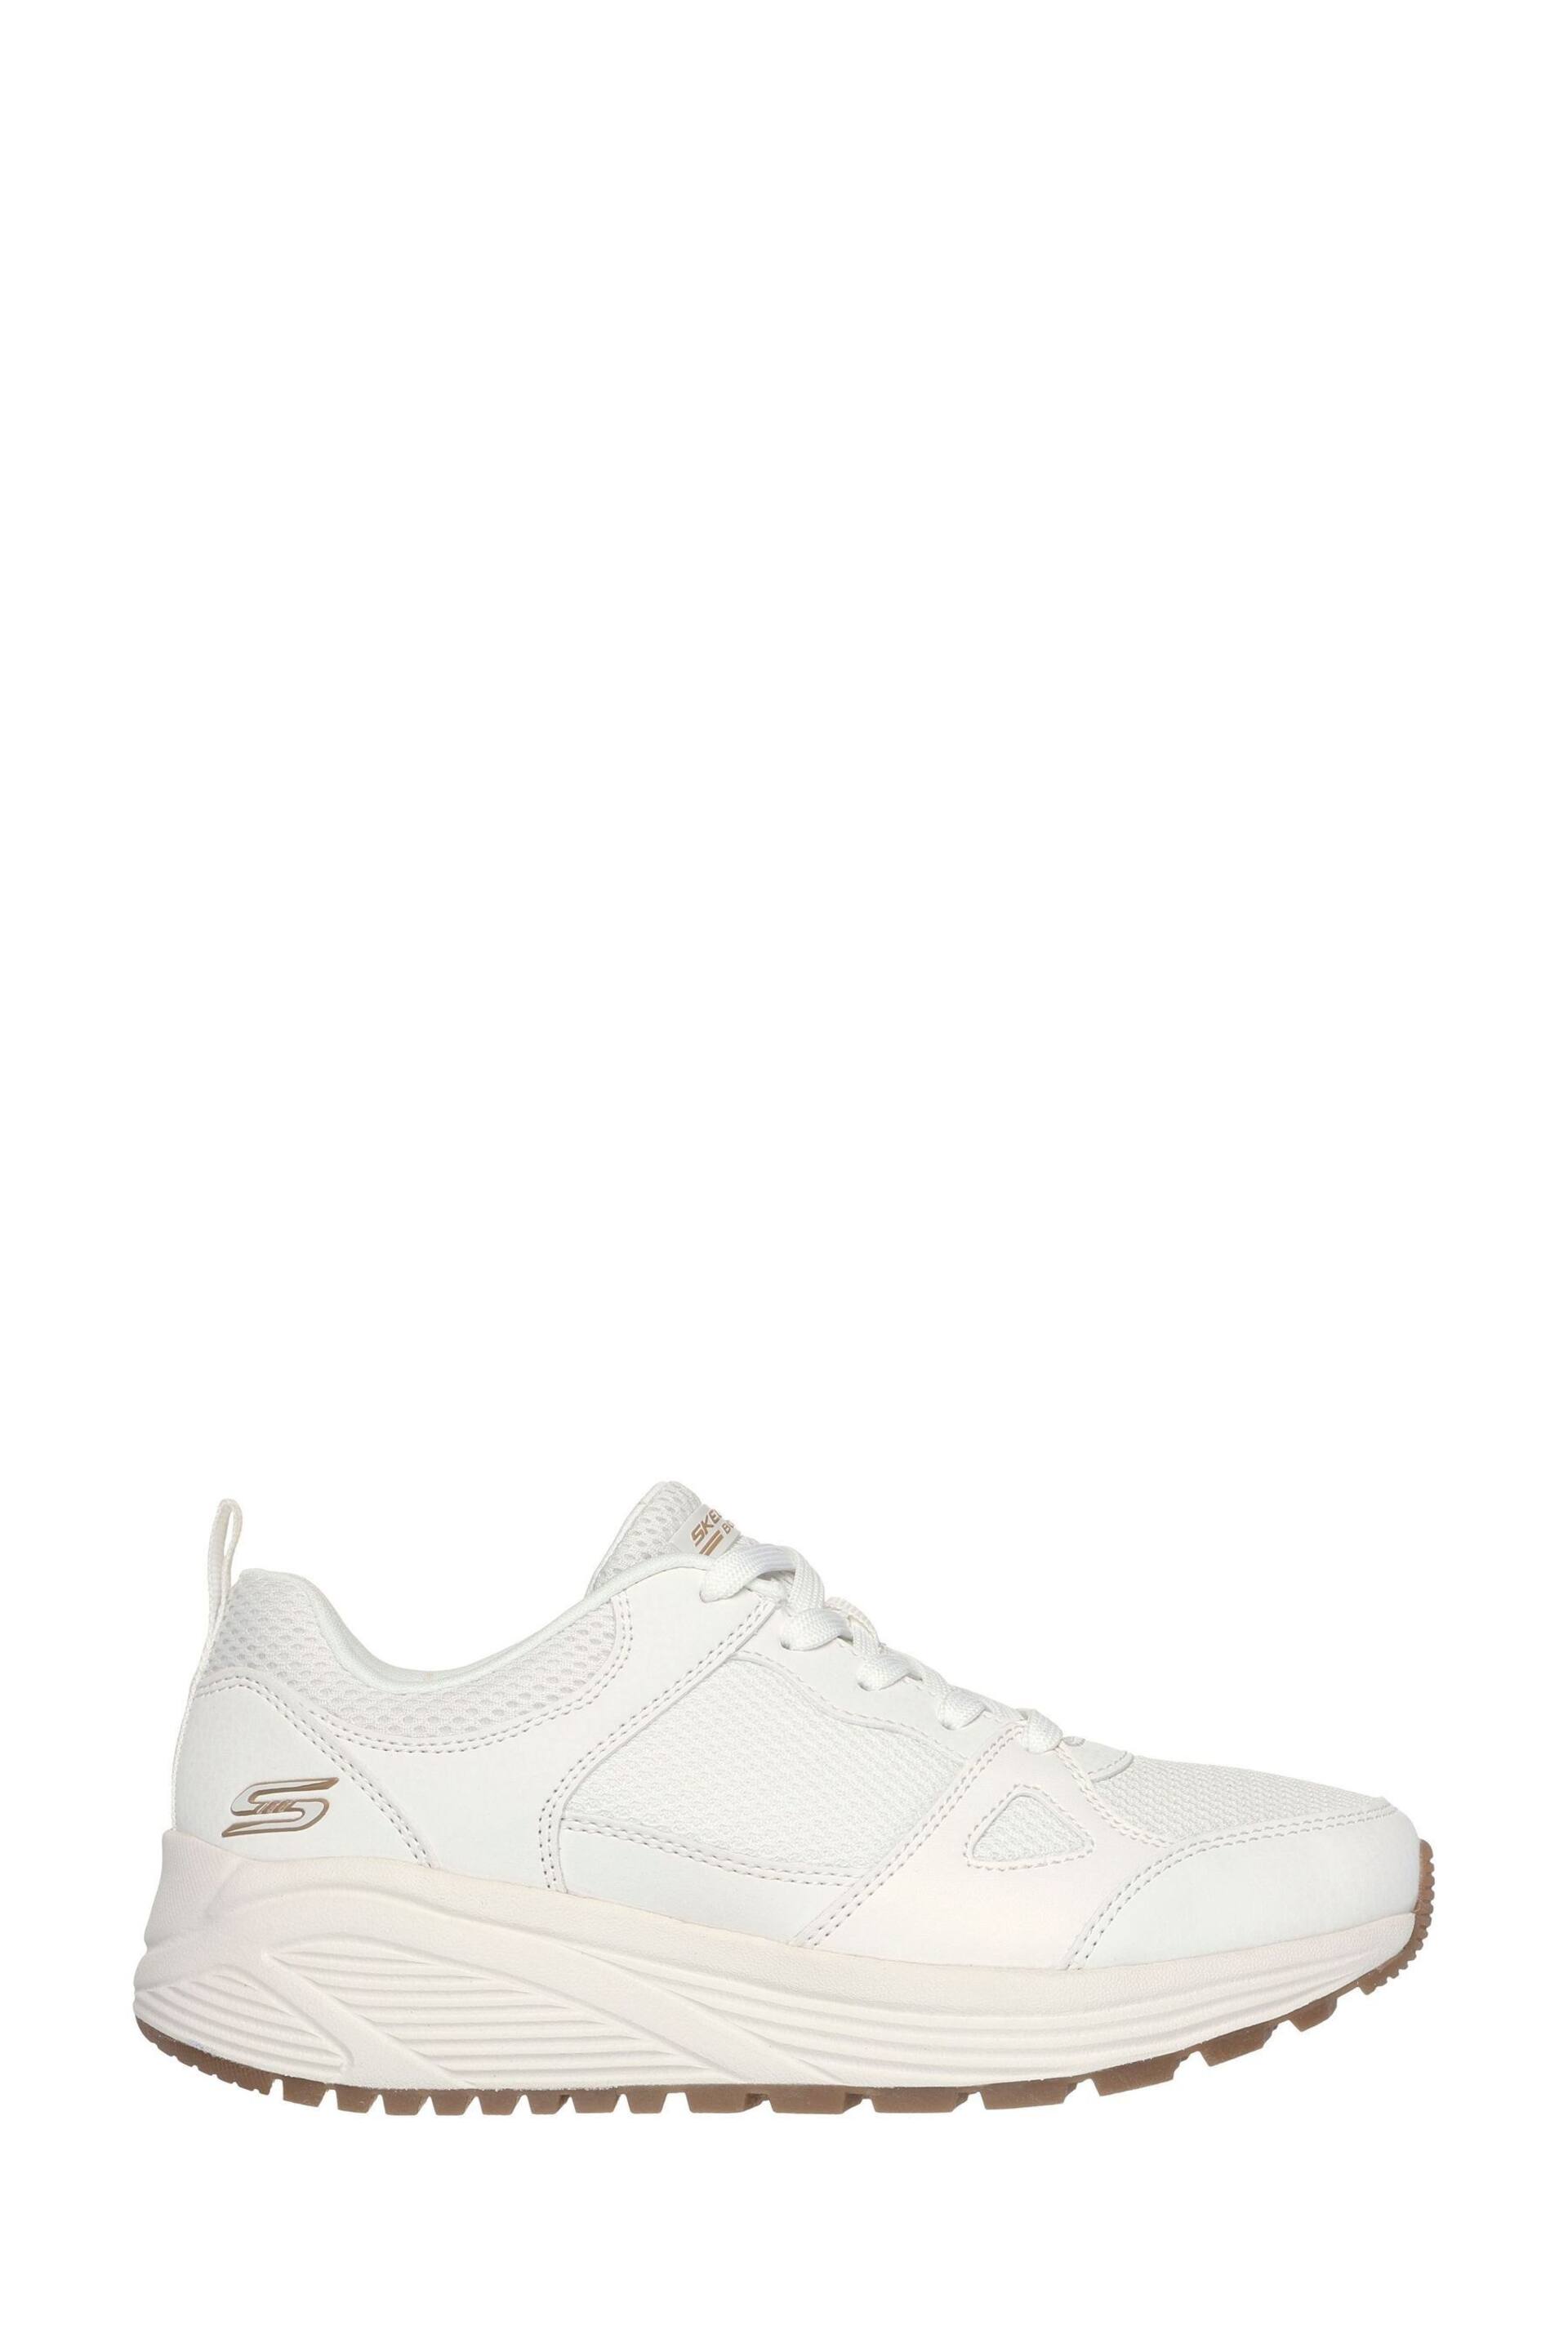 Skechers White Bobs Sparrow 2.0 Trainers - Image 1 of 5